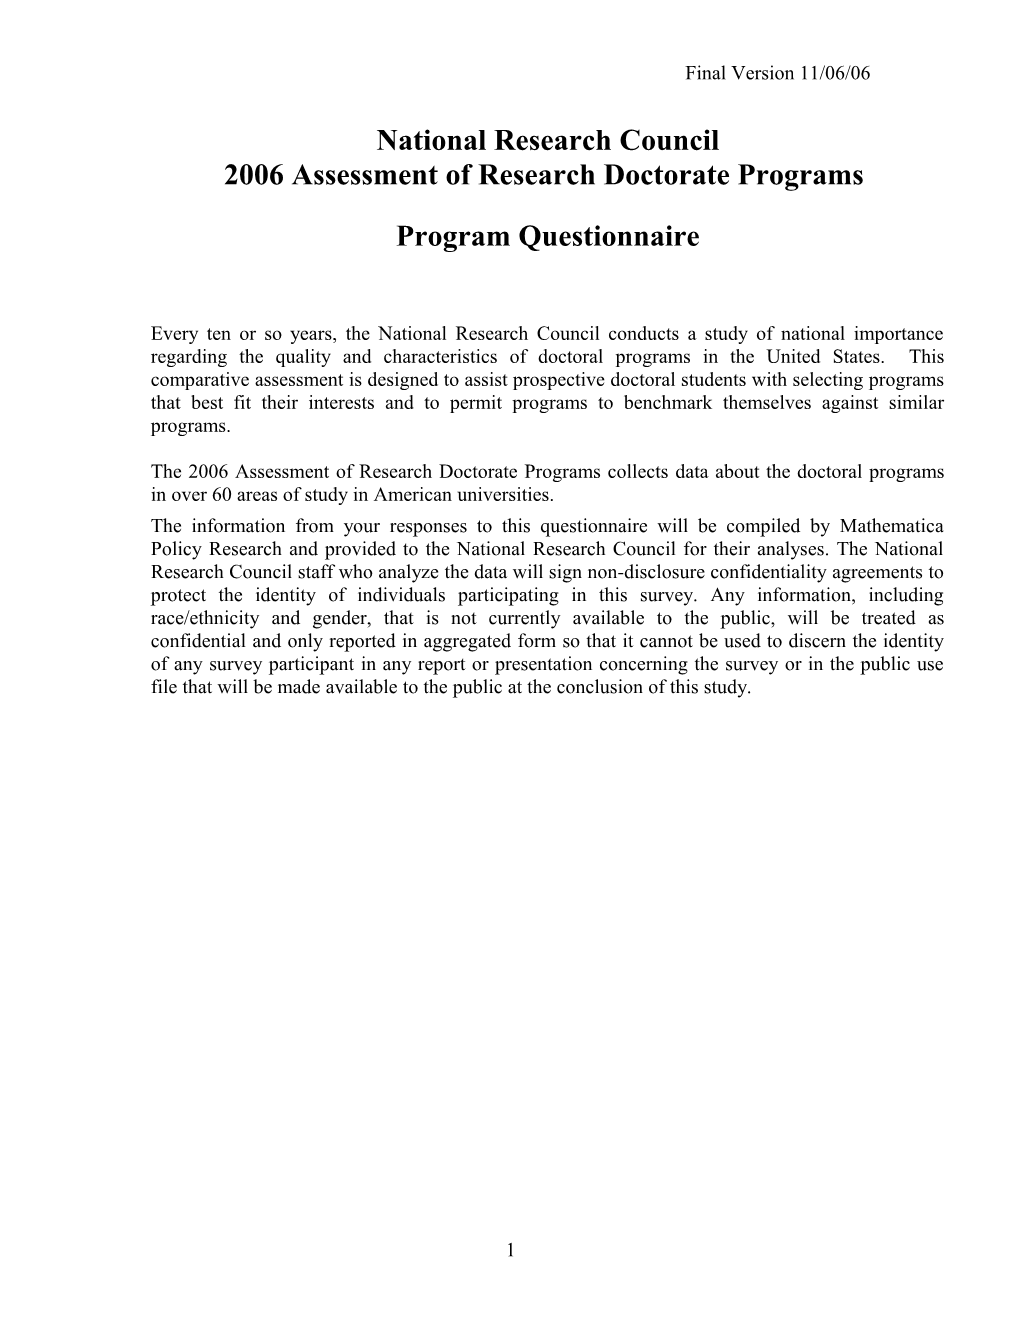 2006 Assessment of Research Doctorate Programs